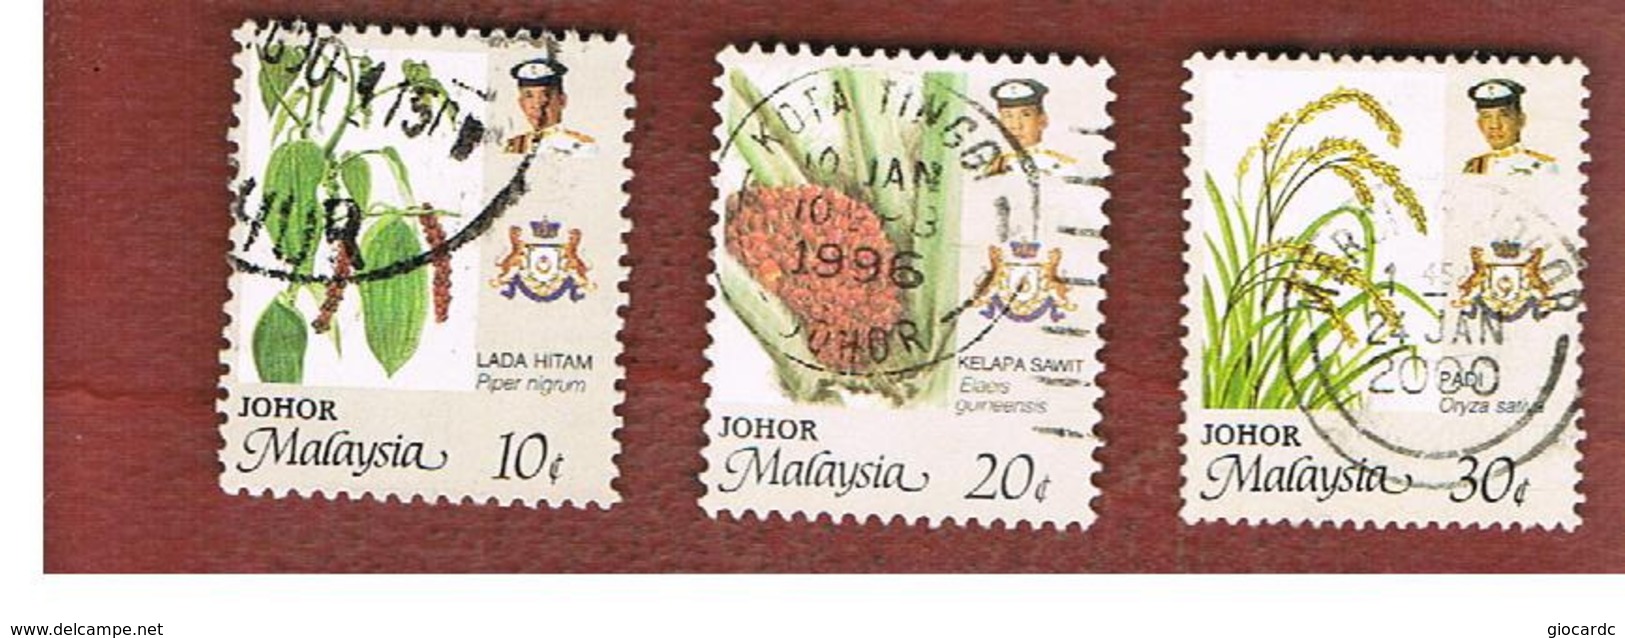 MALESIA: JOHORE (MALAYSIA) -   SG  205.208 - 1986  AGRICULTURAL PRODUCTS     - USED ° - Malesia (1964-...)